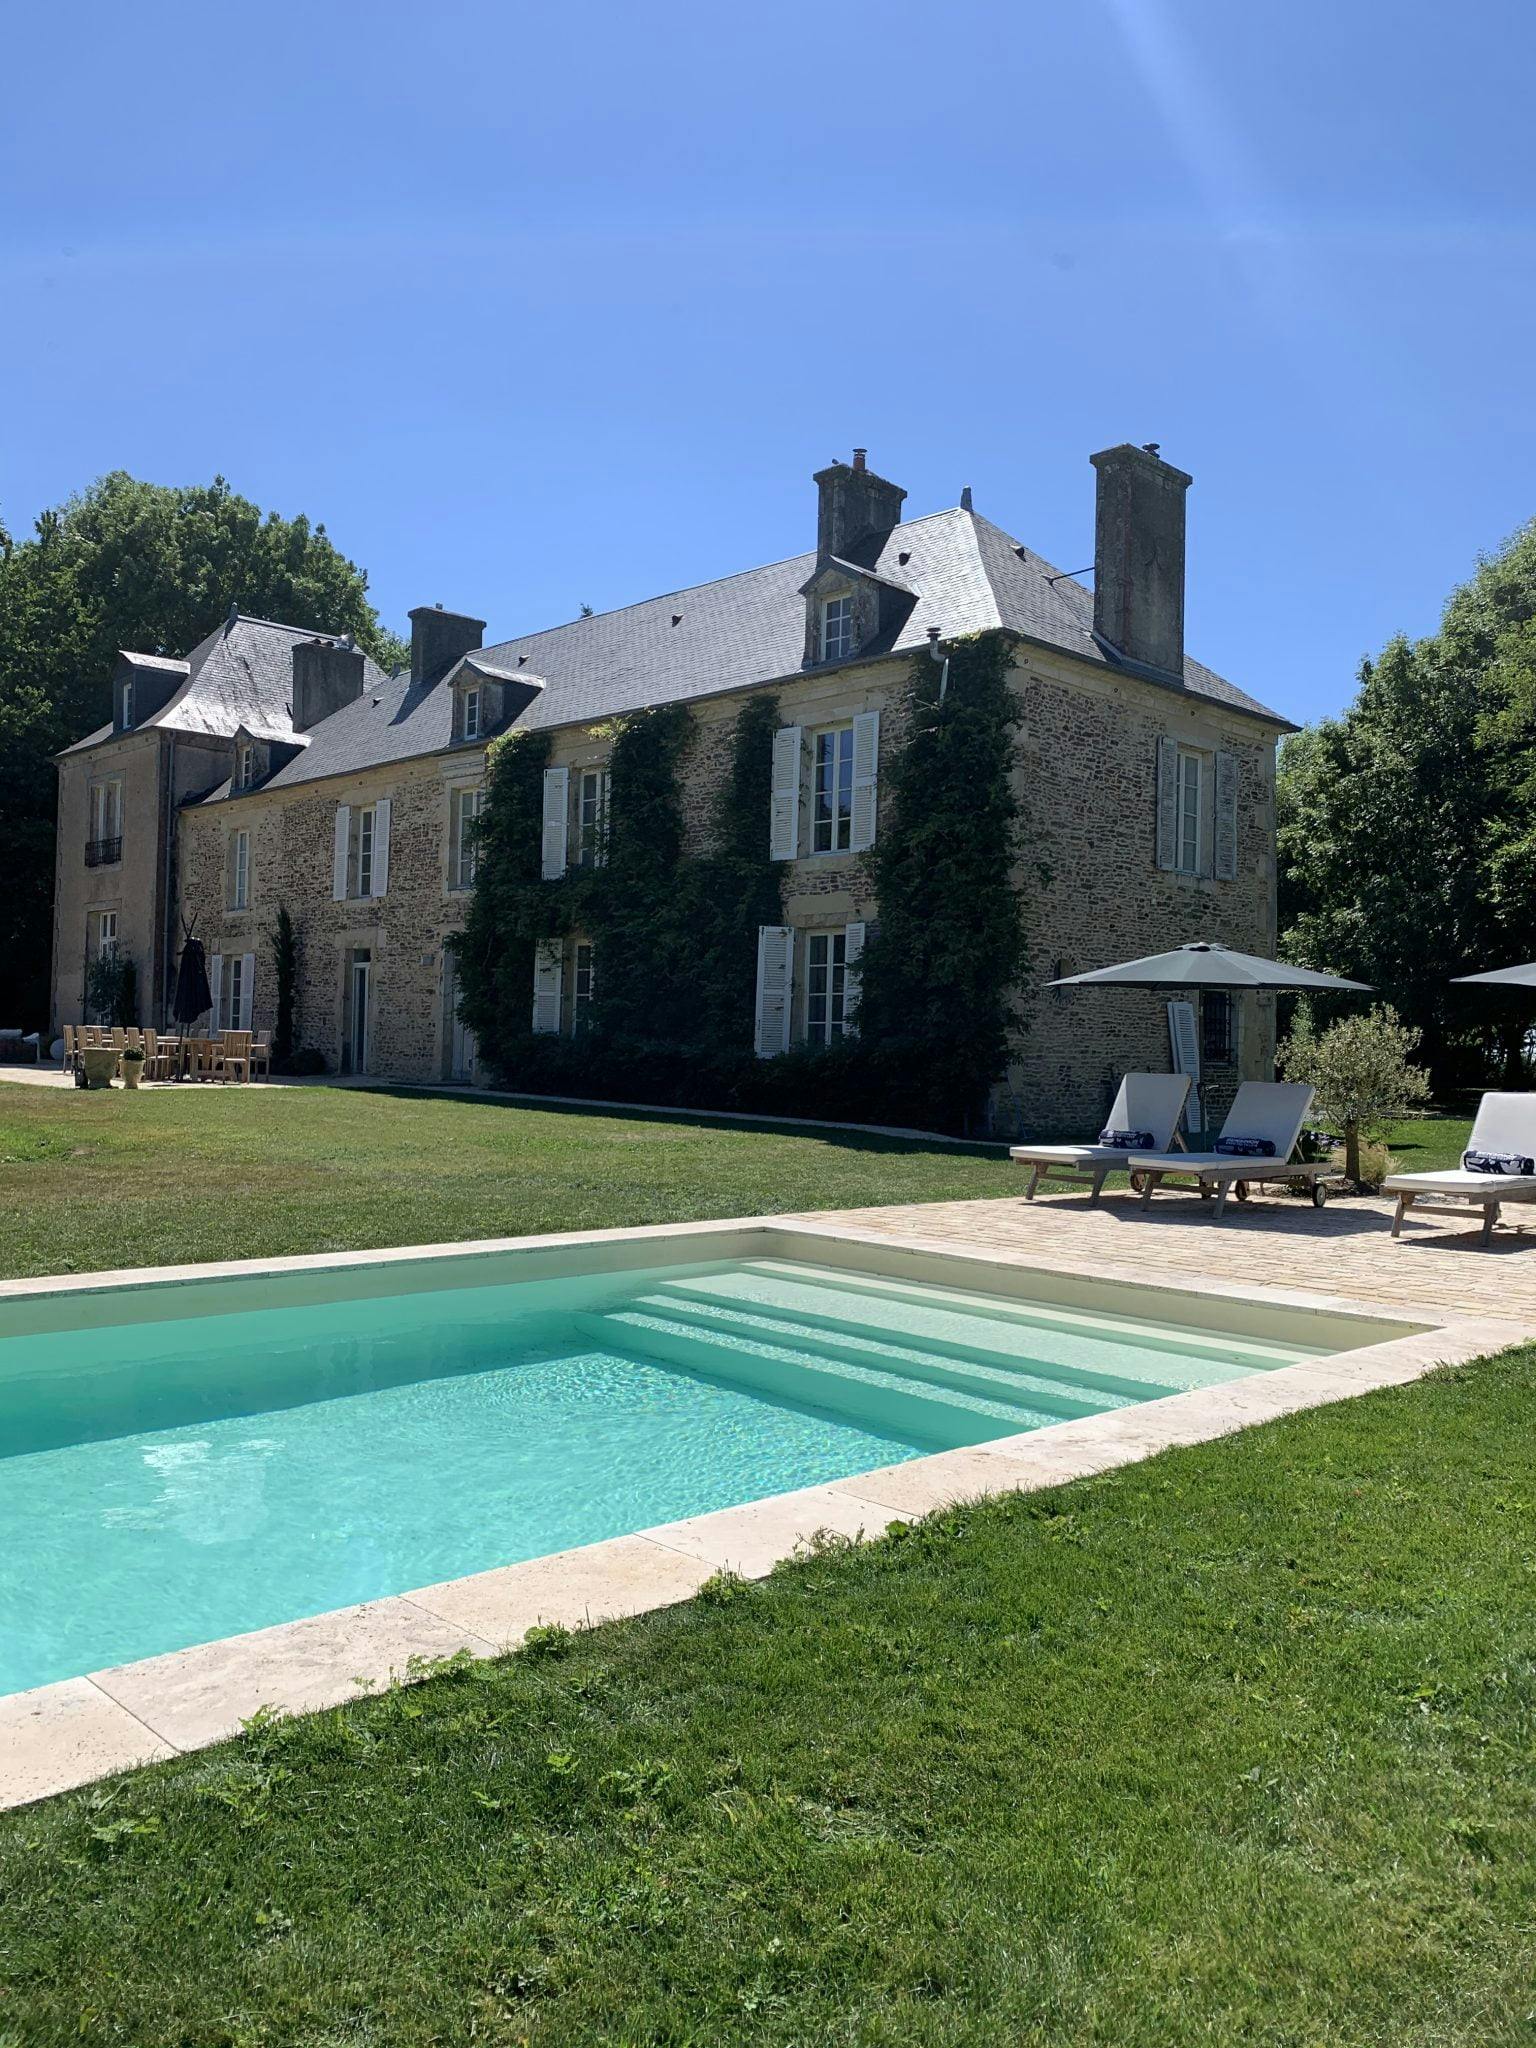 view of the pool and the house